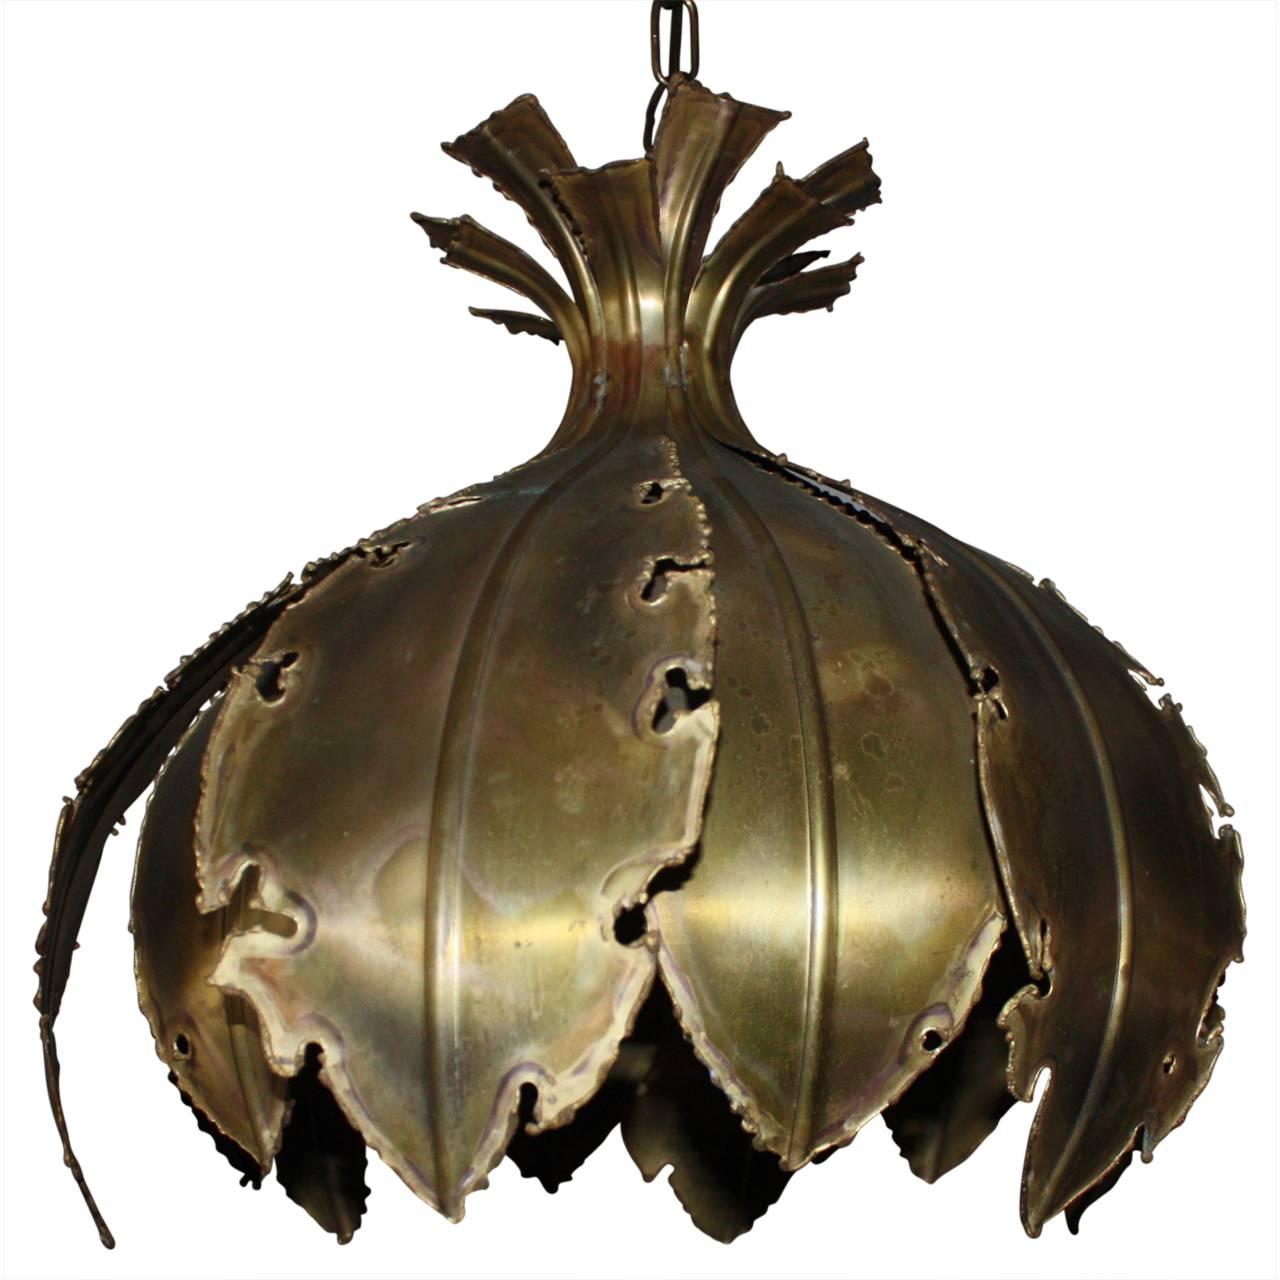 Incredible Svend Aage Holm Sorensen brass tulip lamp. The pendant lamp is made of torch cut brass. Comes with the original brass fixture, canopy and chain.